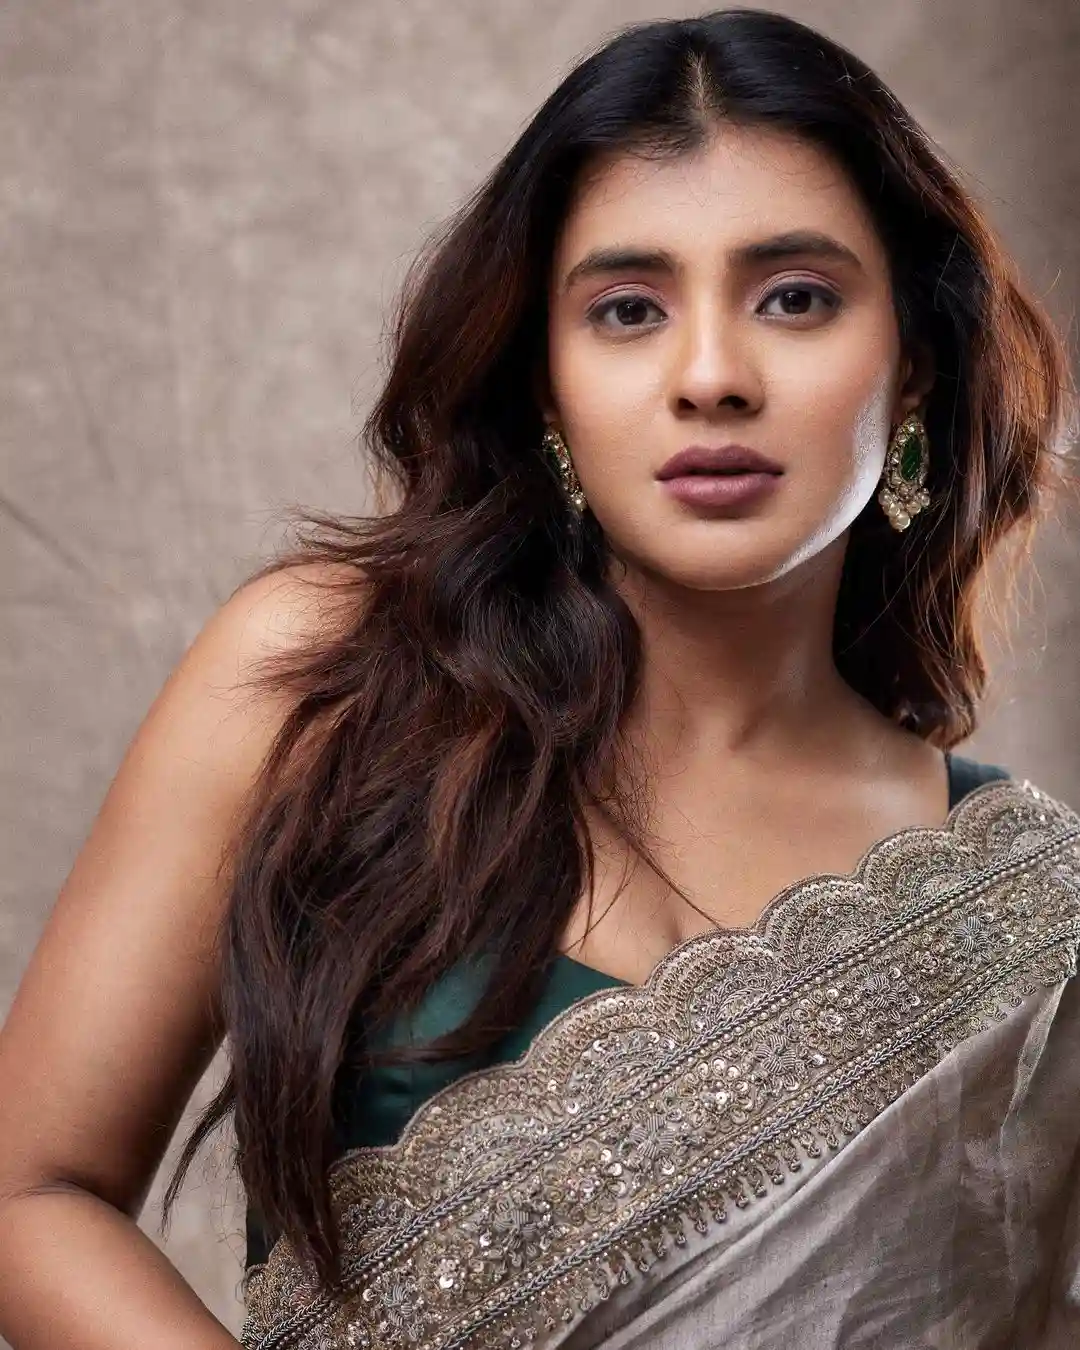 Hebah Patel shines in Saree after a long time